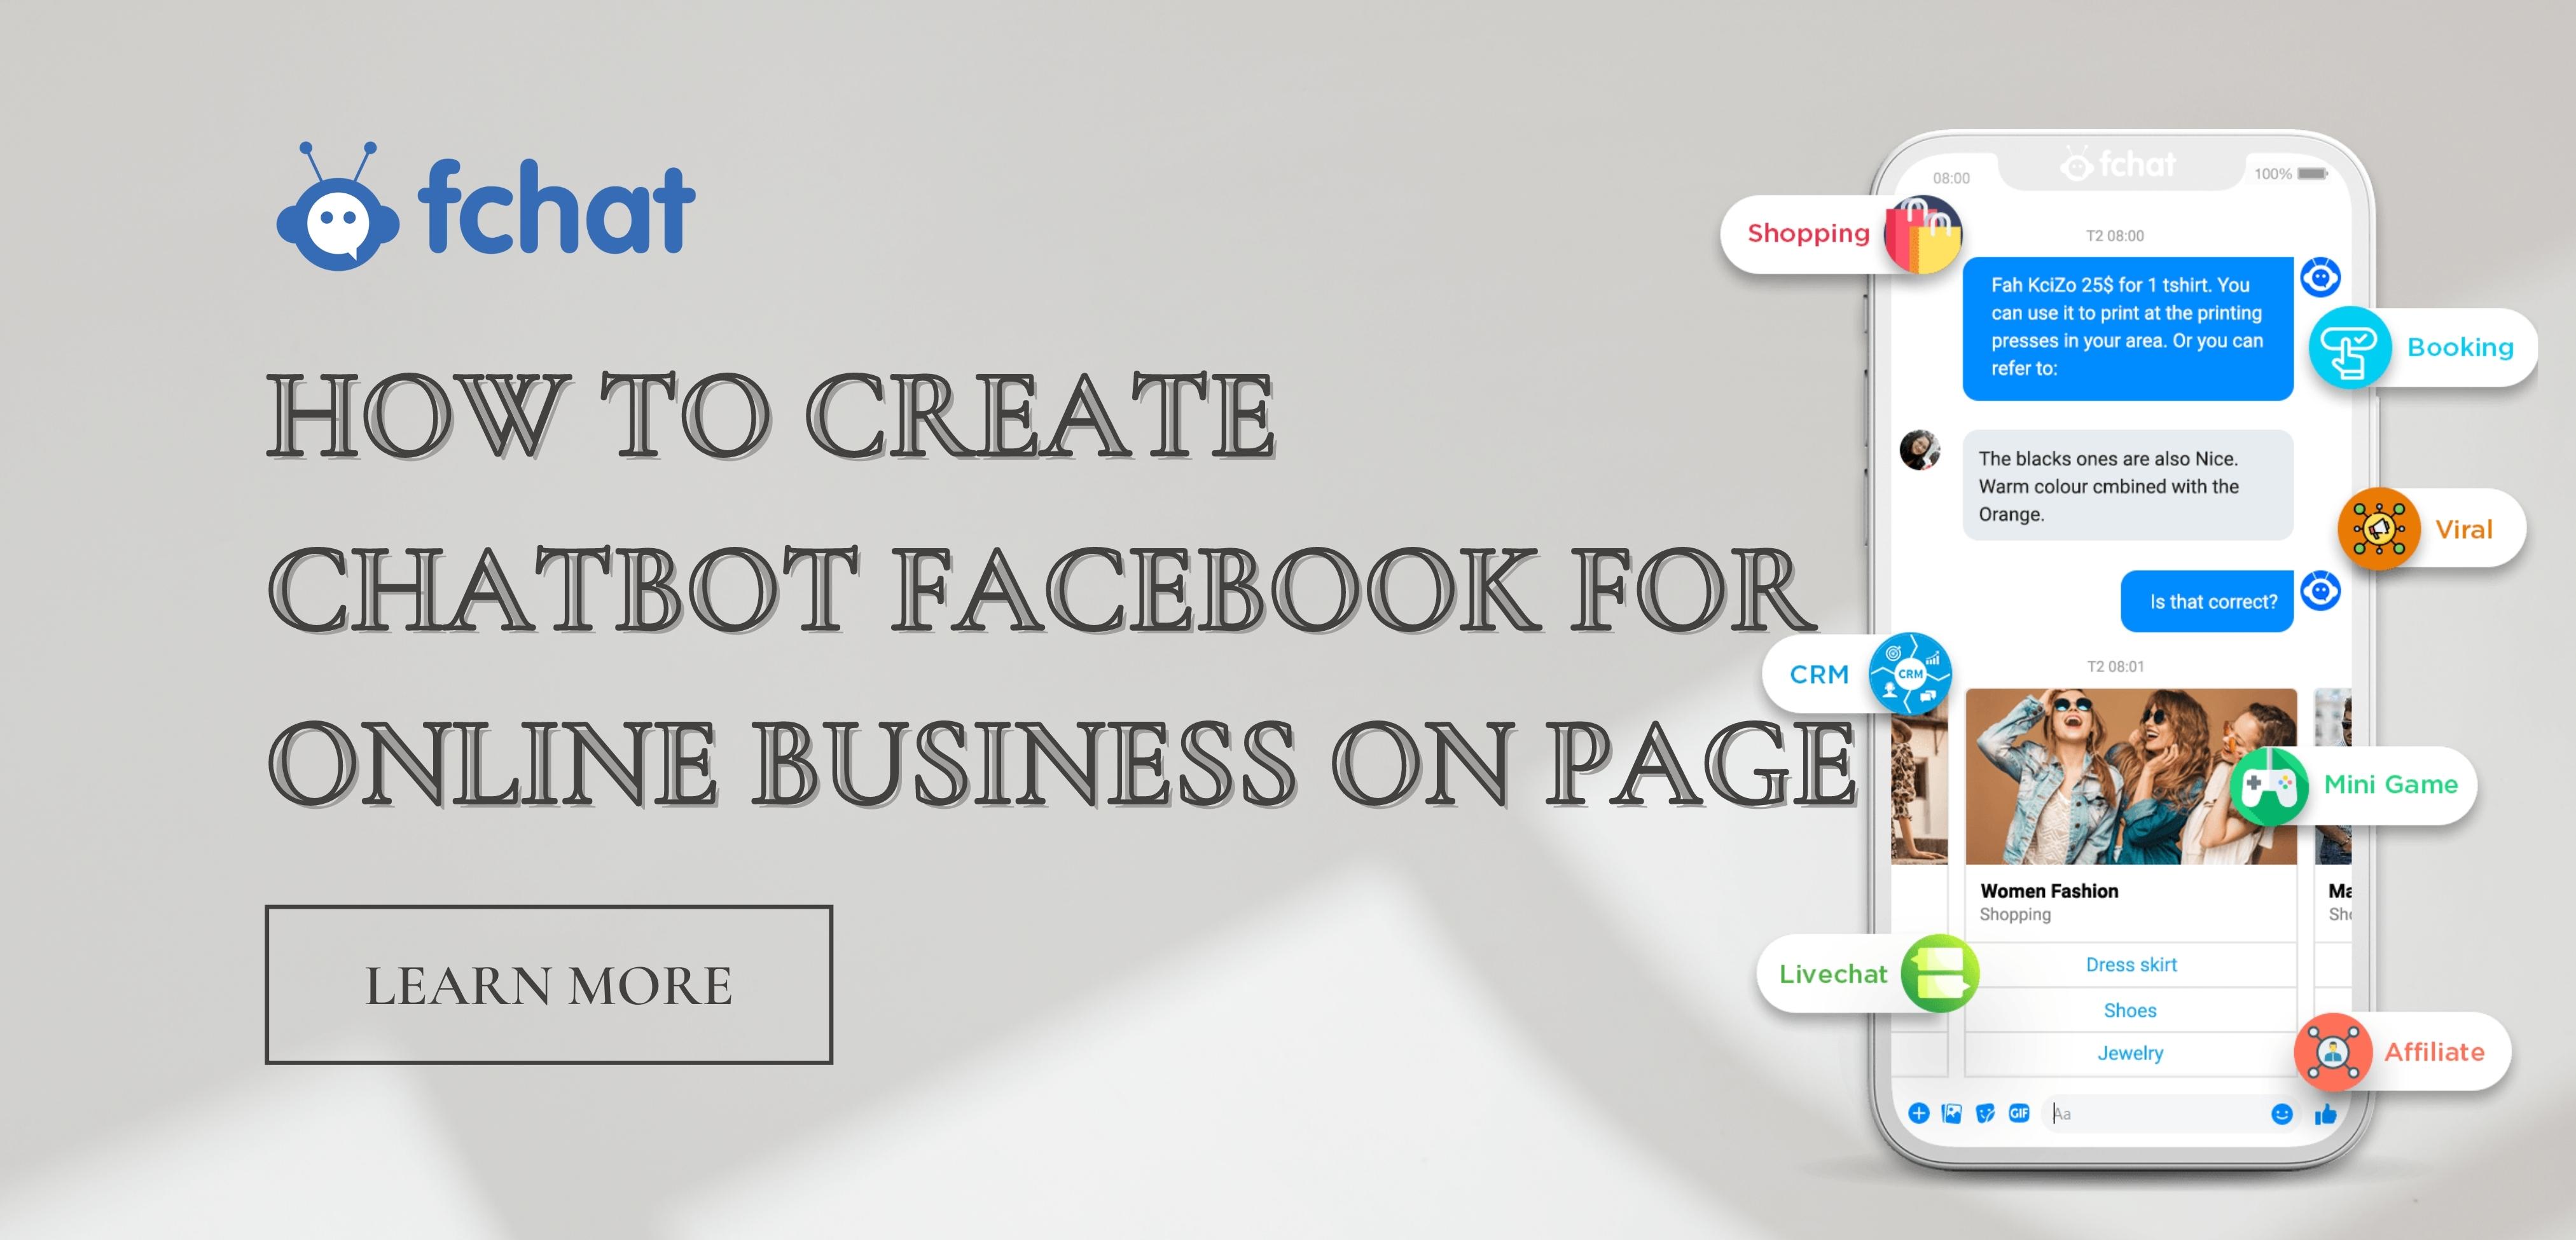 HOW TO CREATE FACEBOOK CHATBOT FOR YOUR ONLINE BUSINESS PAGE